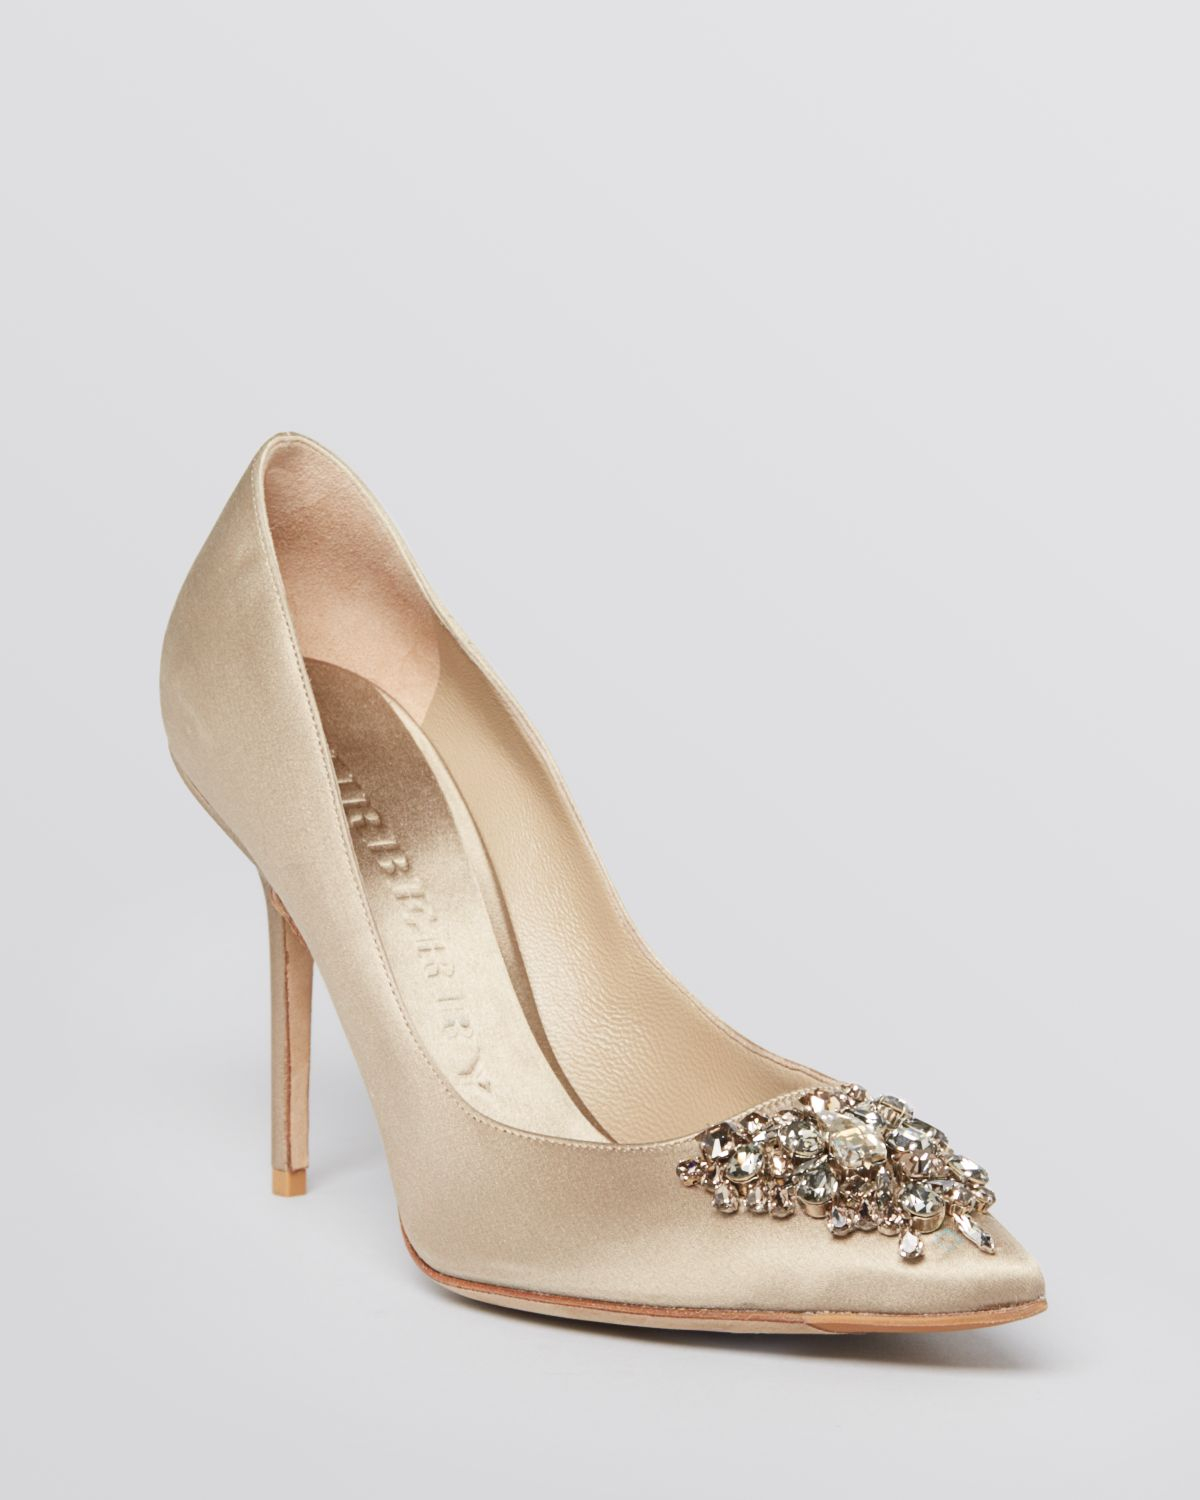 Lyst - Burberry Pointed Toe Evening Pumps Ormelie High Heel in Natural